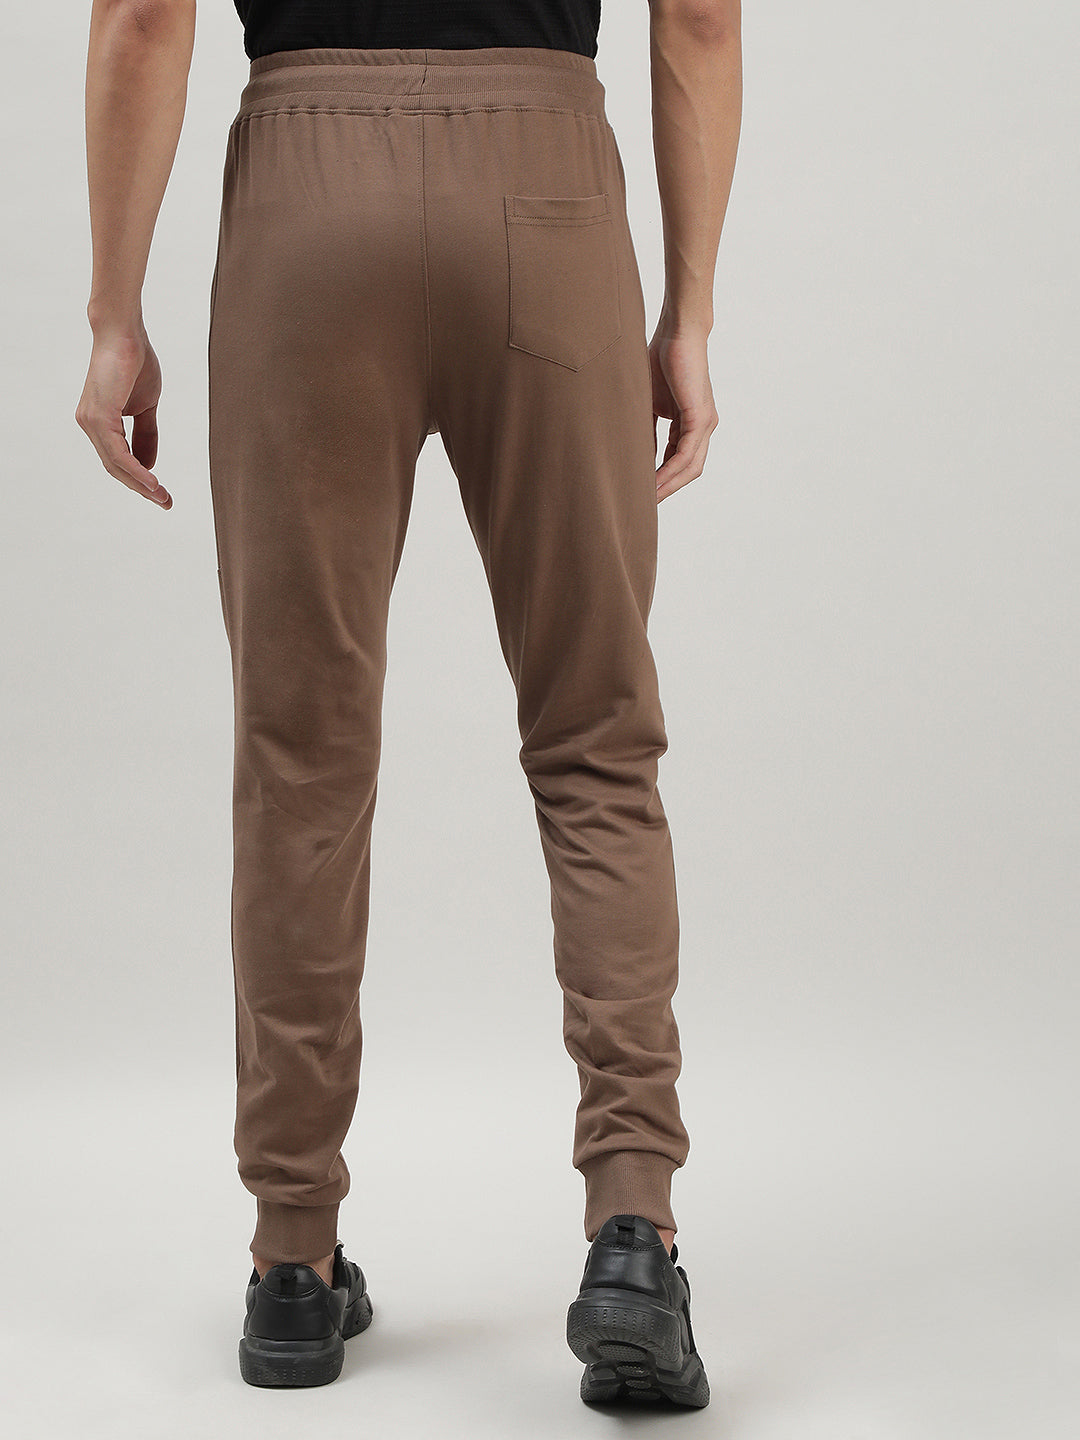 Peanut Brown Casual Joggers for Men at Loom & Spin